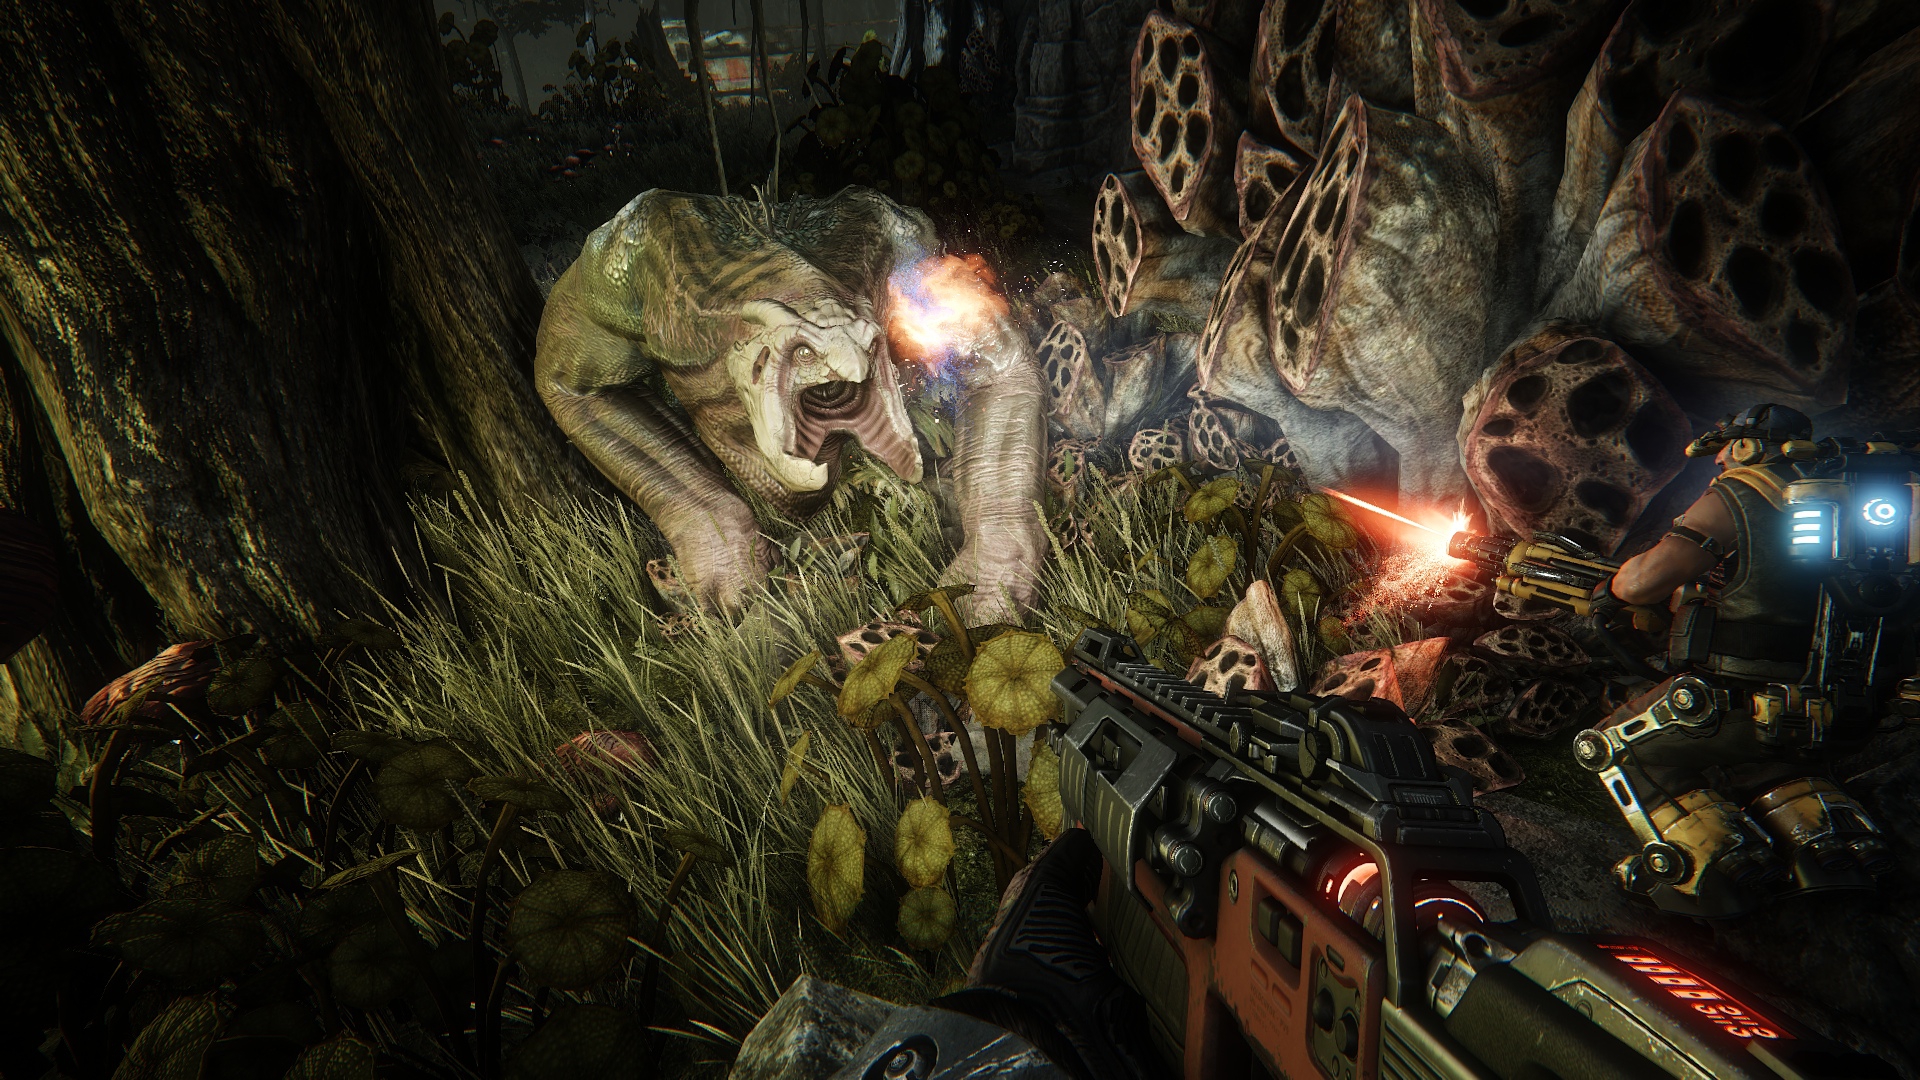 Evolve screenshots emerge, featuring prehistoric-esque monsters in multiplayer/co-op FPS